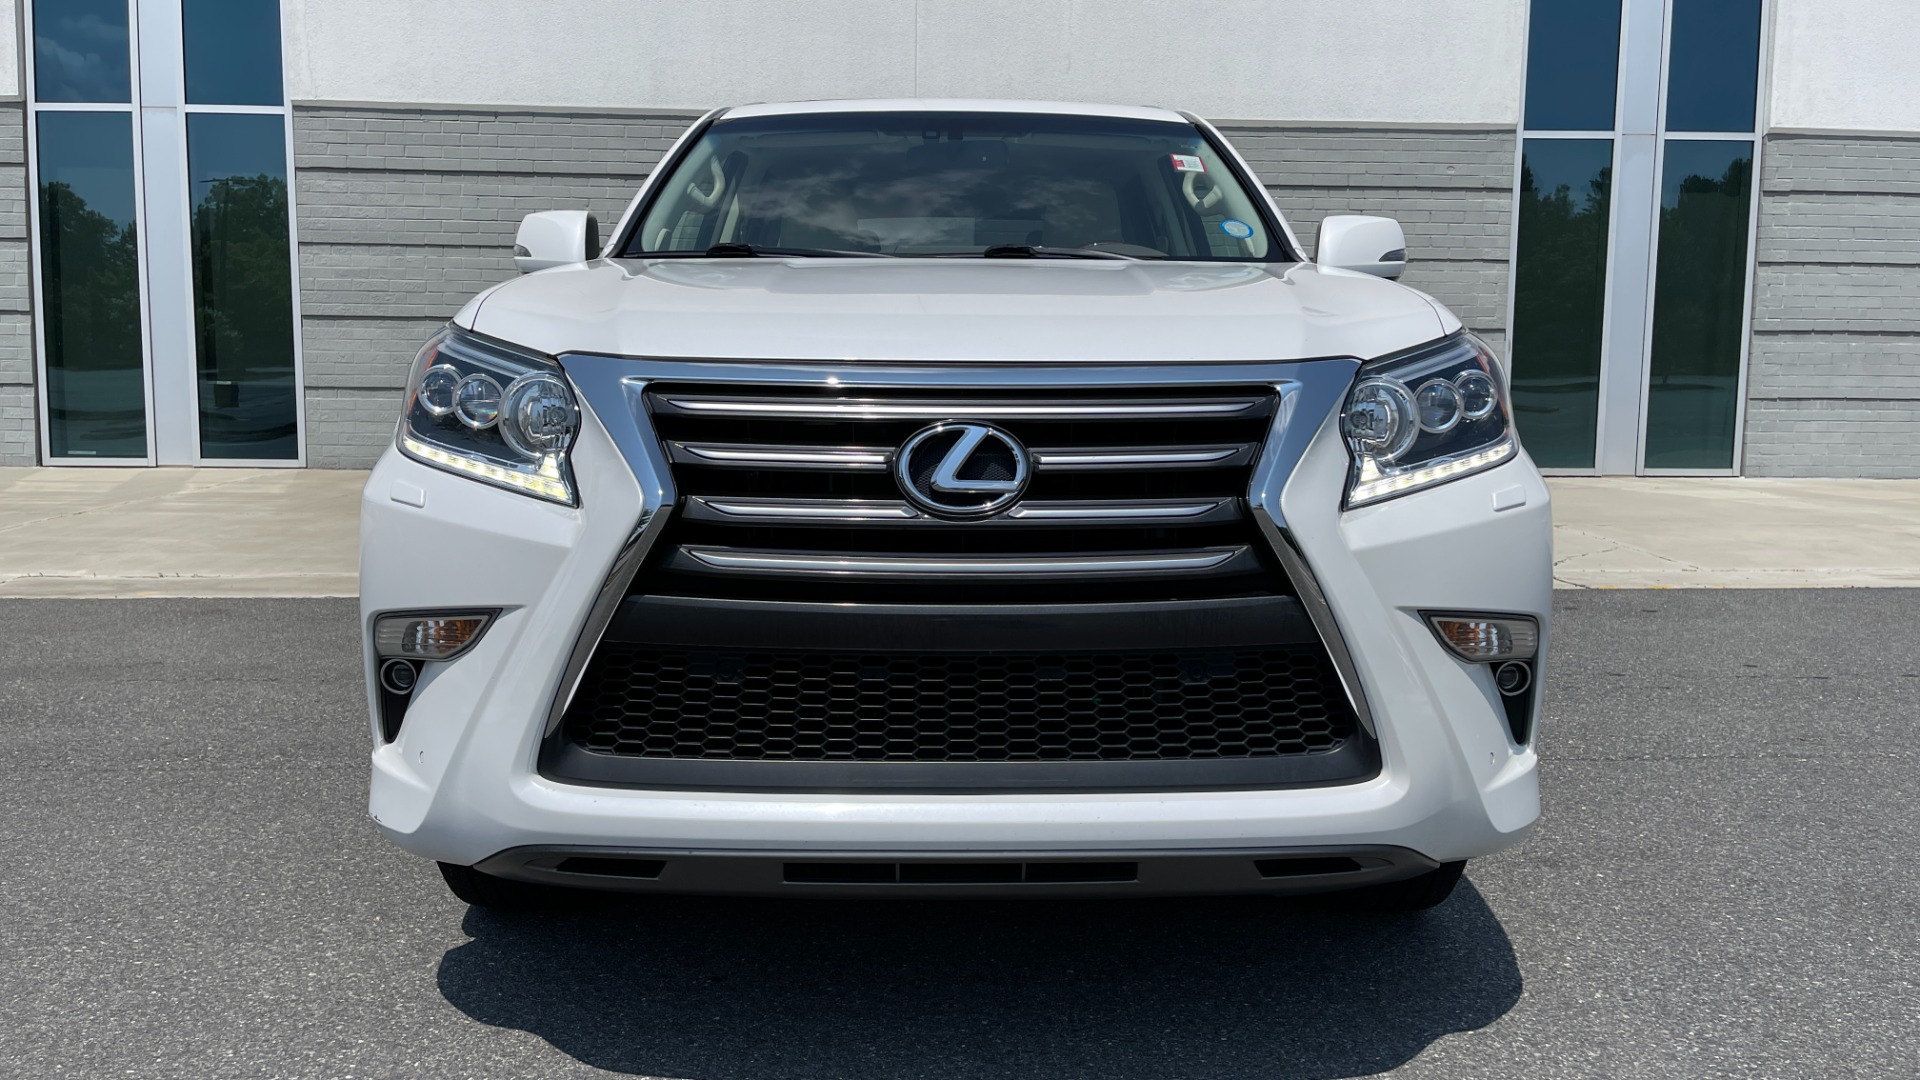 Used 2015 Lexus GX 460 LUXURY / 4.6L V8 / 4WD / NAV / SUNROOF / 3-ROW / REARVIEW for sale Sold at Formula Imports in Charlotte NC 28227 9